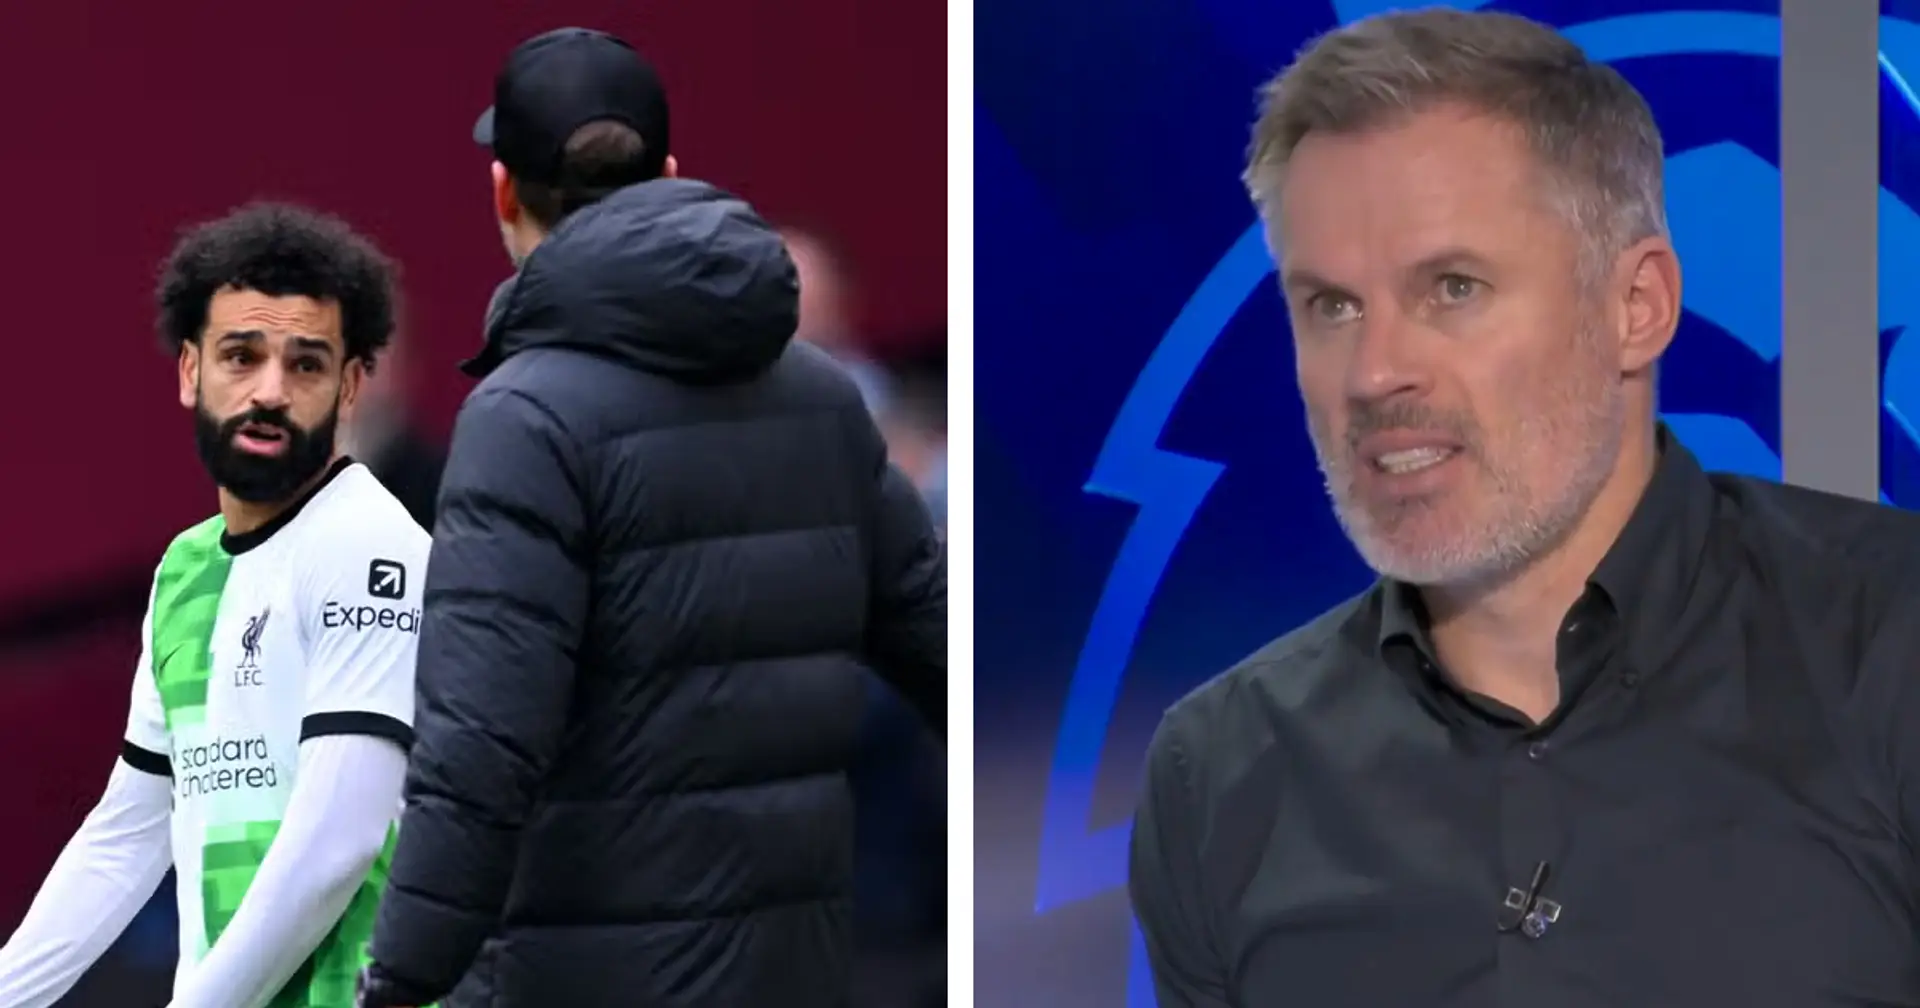 'The only reason': Jamie Carragher offers theory on Mo Salah argument with Jurgen Klopp